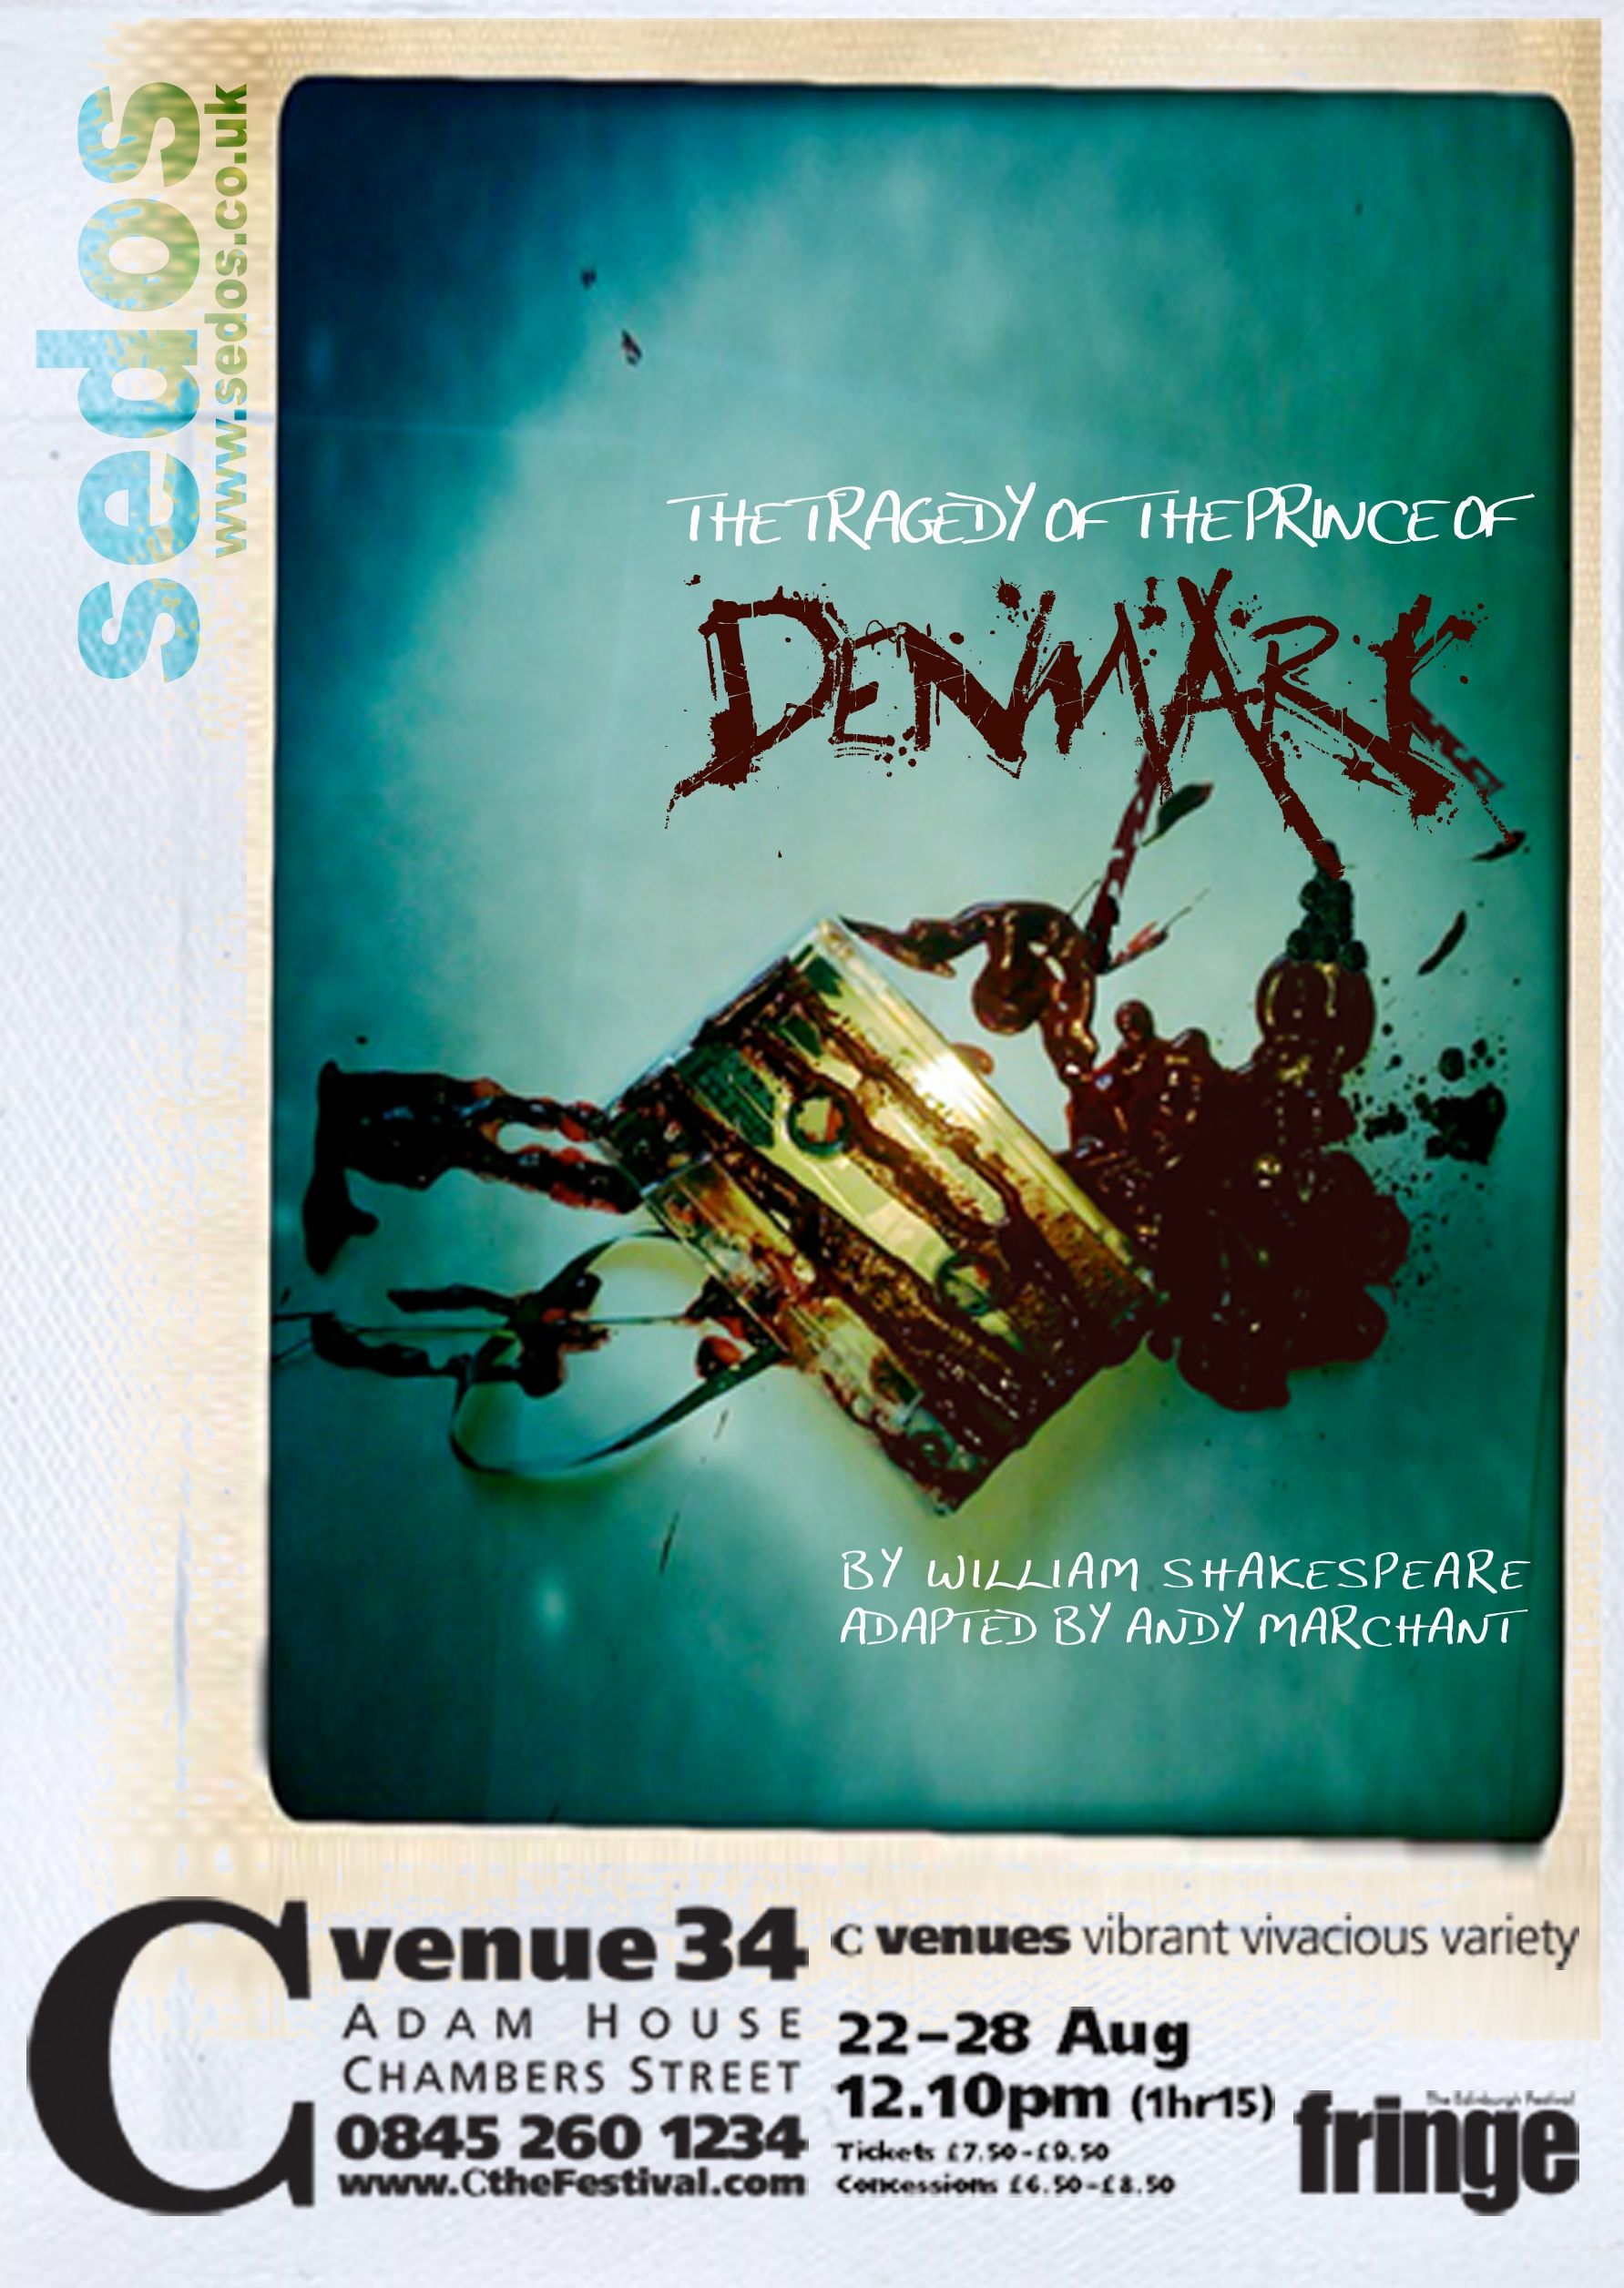 The Tragedy of the Prince of Denmark flyer image